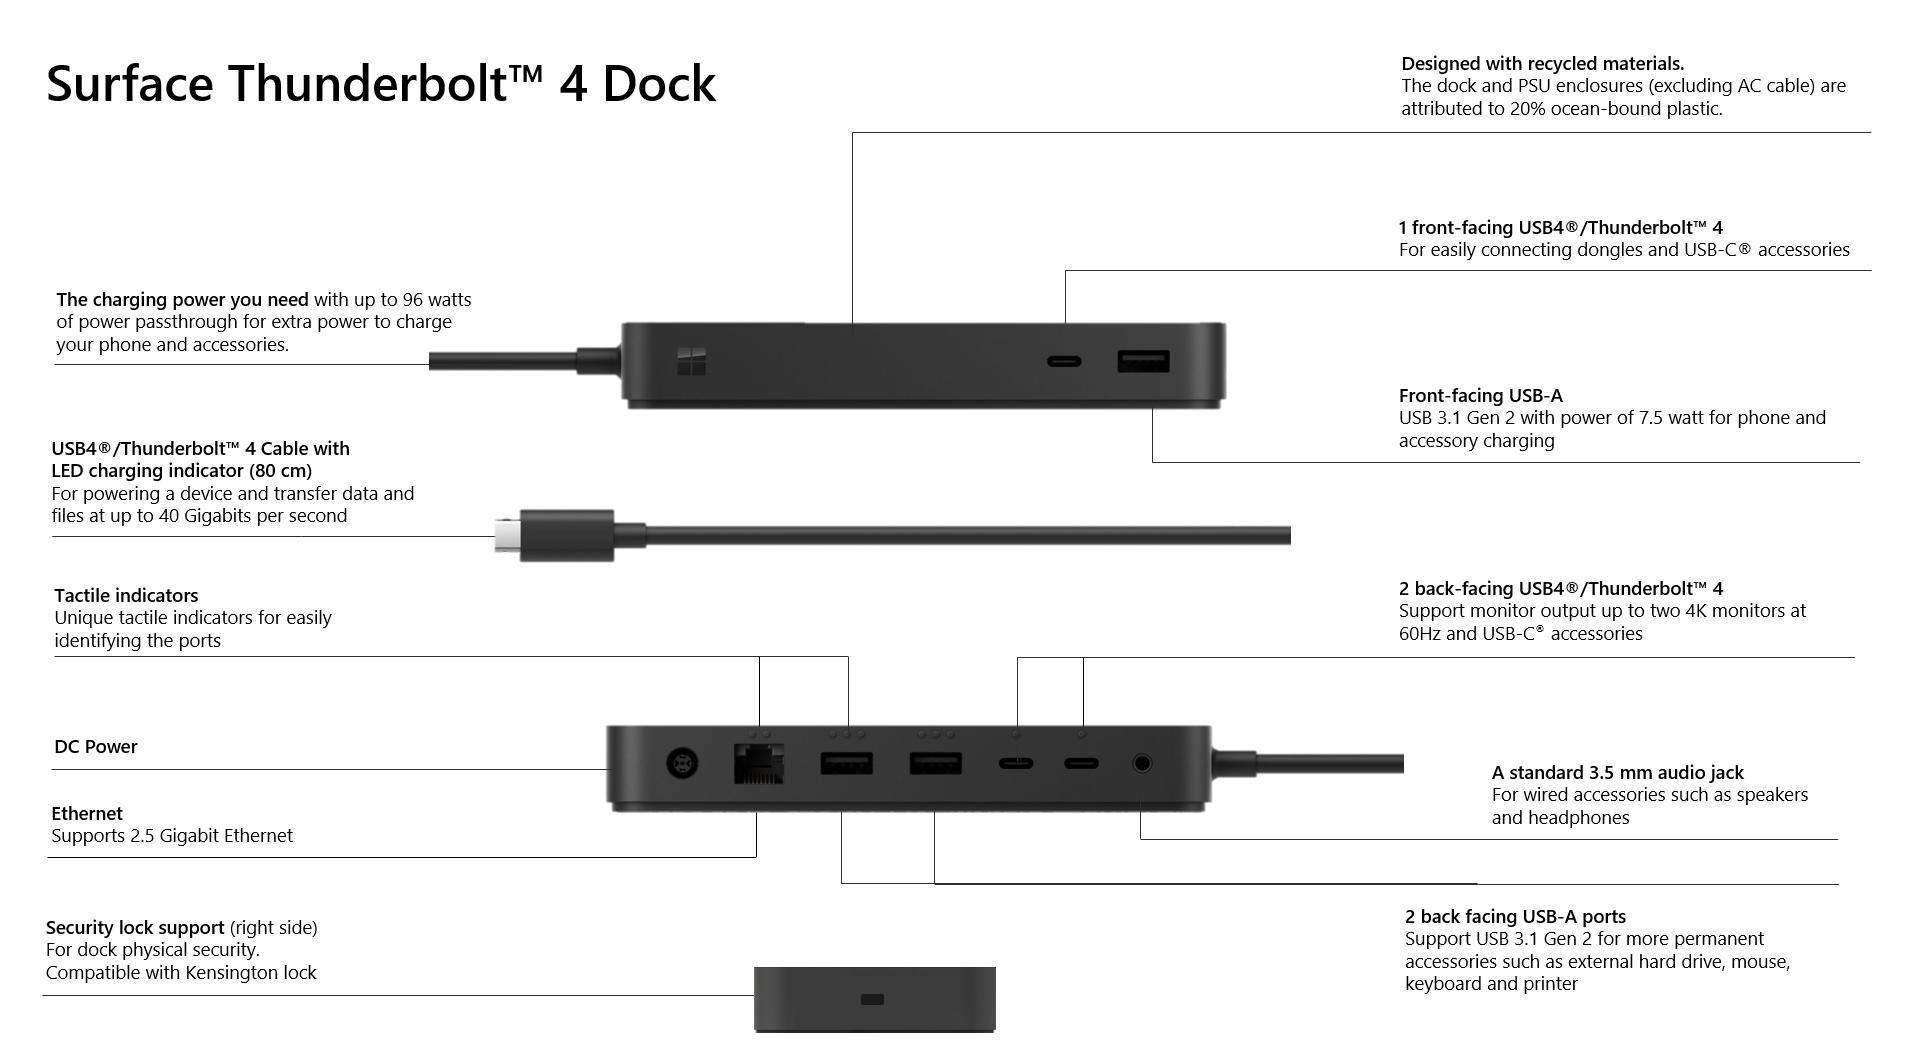 Supercharge your Surface with the Surface Thunderbolt™ 4 Dock - Data#3